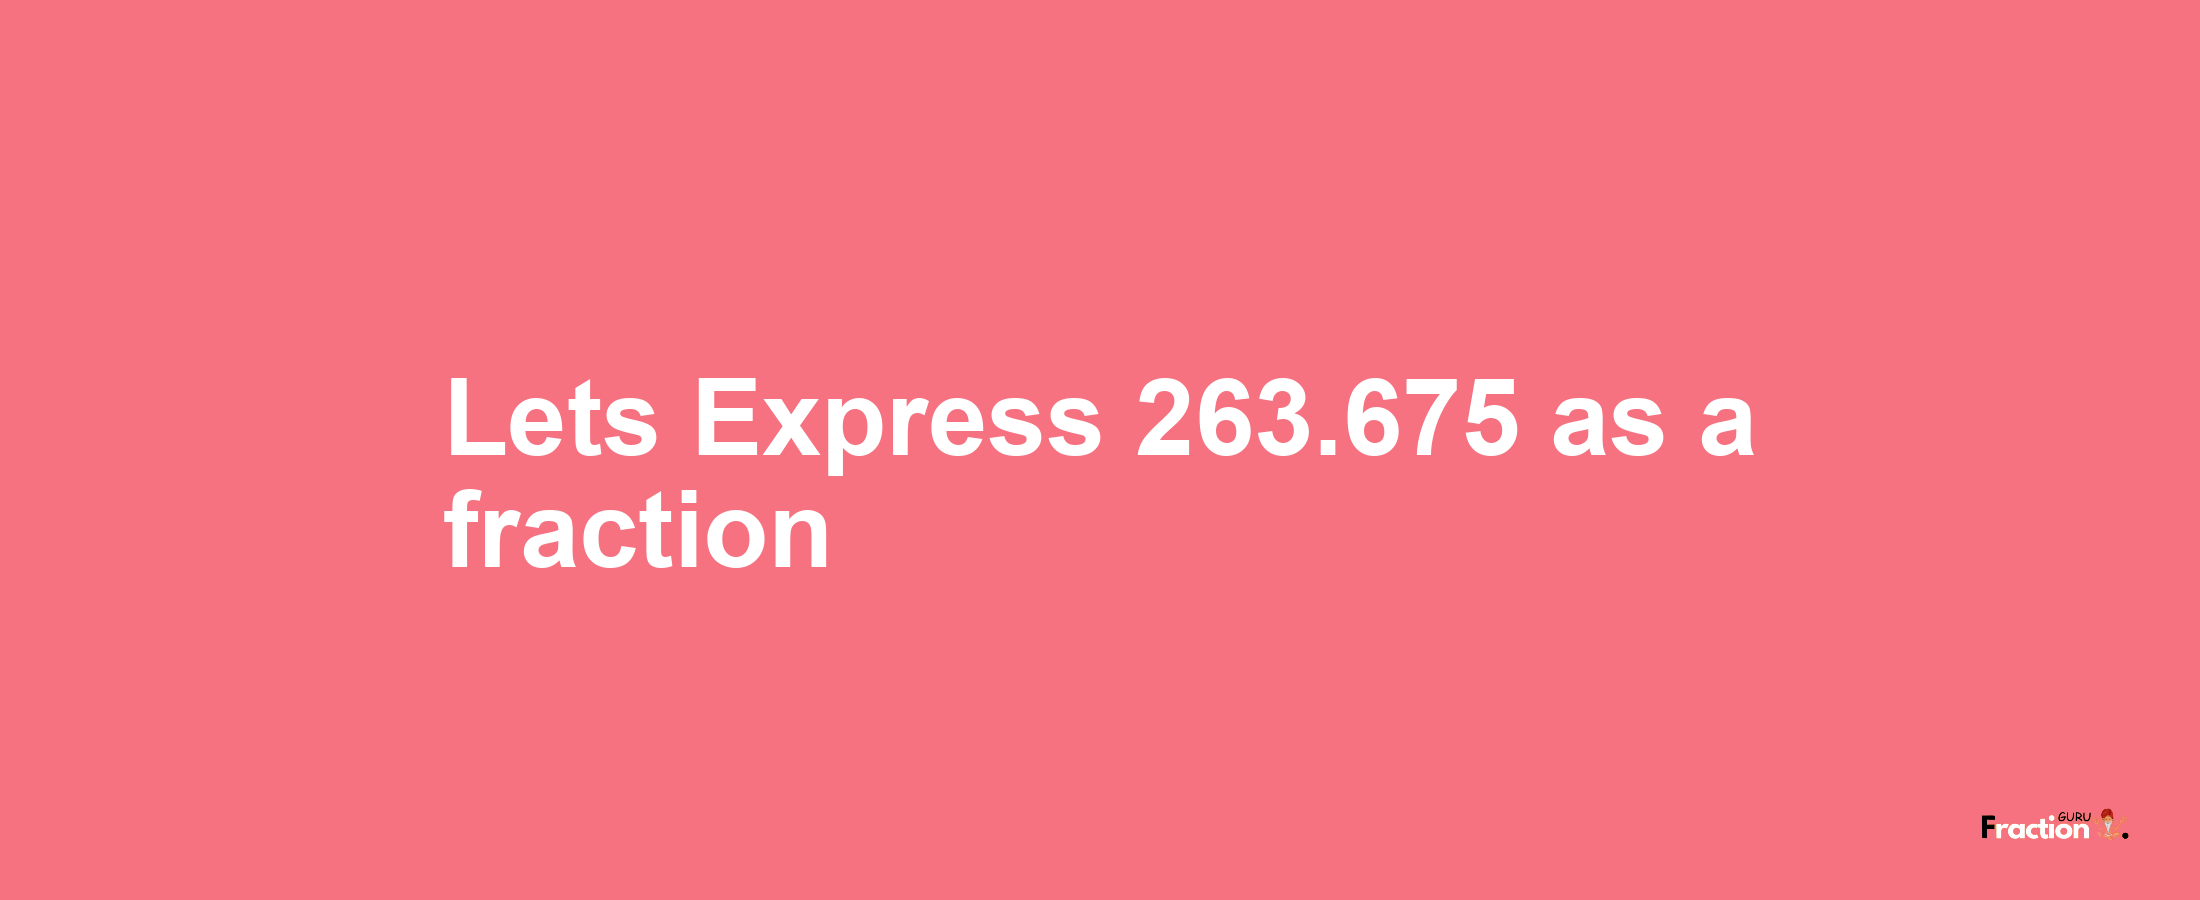 Lets Express 263.675 as afraction